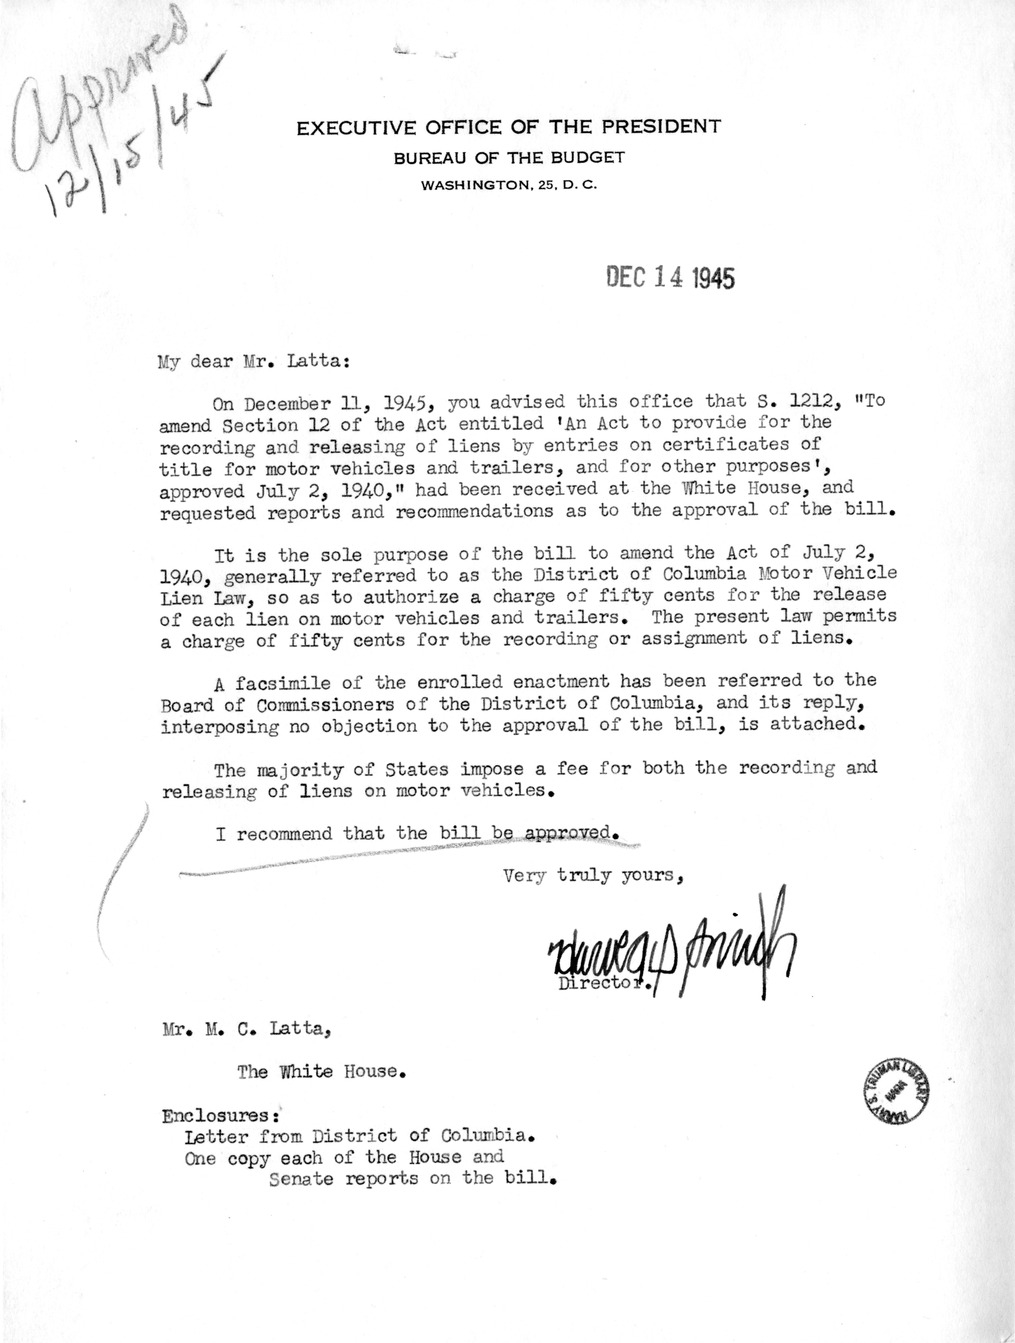 Memorandum from Harold D. Smith to M. C. Latta, S. 1212, To Amend Section 12 of an Act to Provide for the Recording and Releasing of Liens by Entries on Certificates of Title for Motor Vehicles and Trailers, Approved July 2, 1940, with Attachments